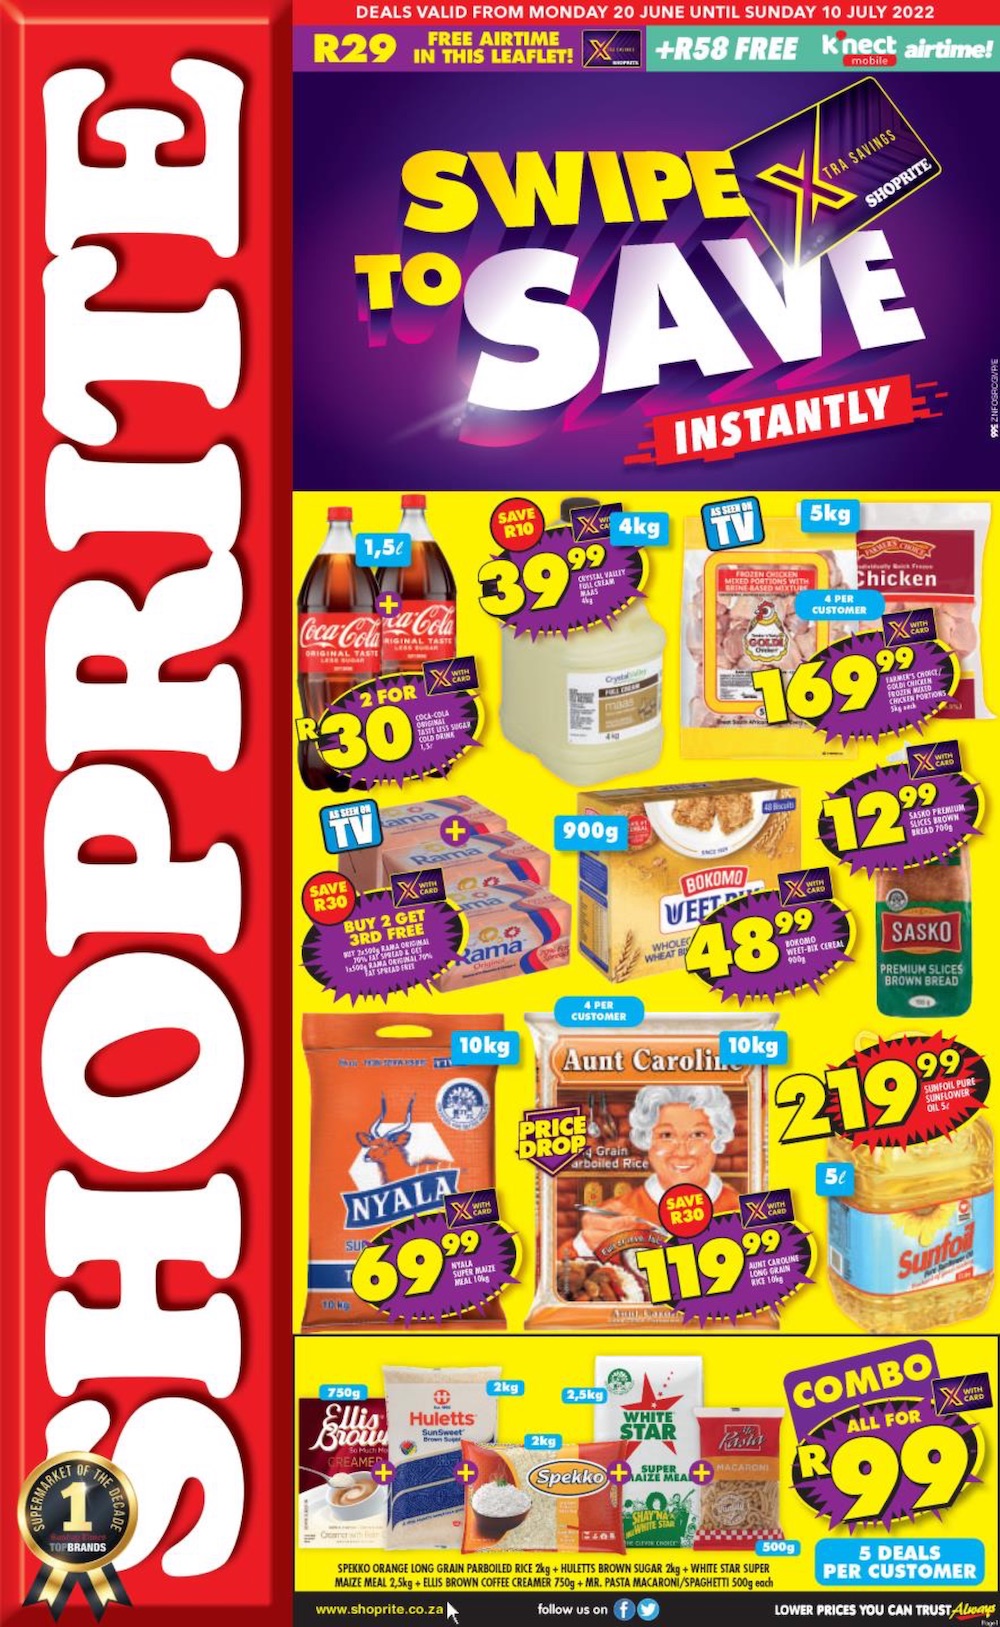 Especials on X: #Shoprite Specials 20 Jun – 10 Jul 2022   #specials #southafrica #catalogue #grocery  #groceryshopping #food #shopping #supermarket #grocerystore #grocerylist  #deals #groceries #fresh #foodie #discount #healthy